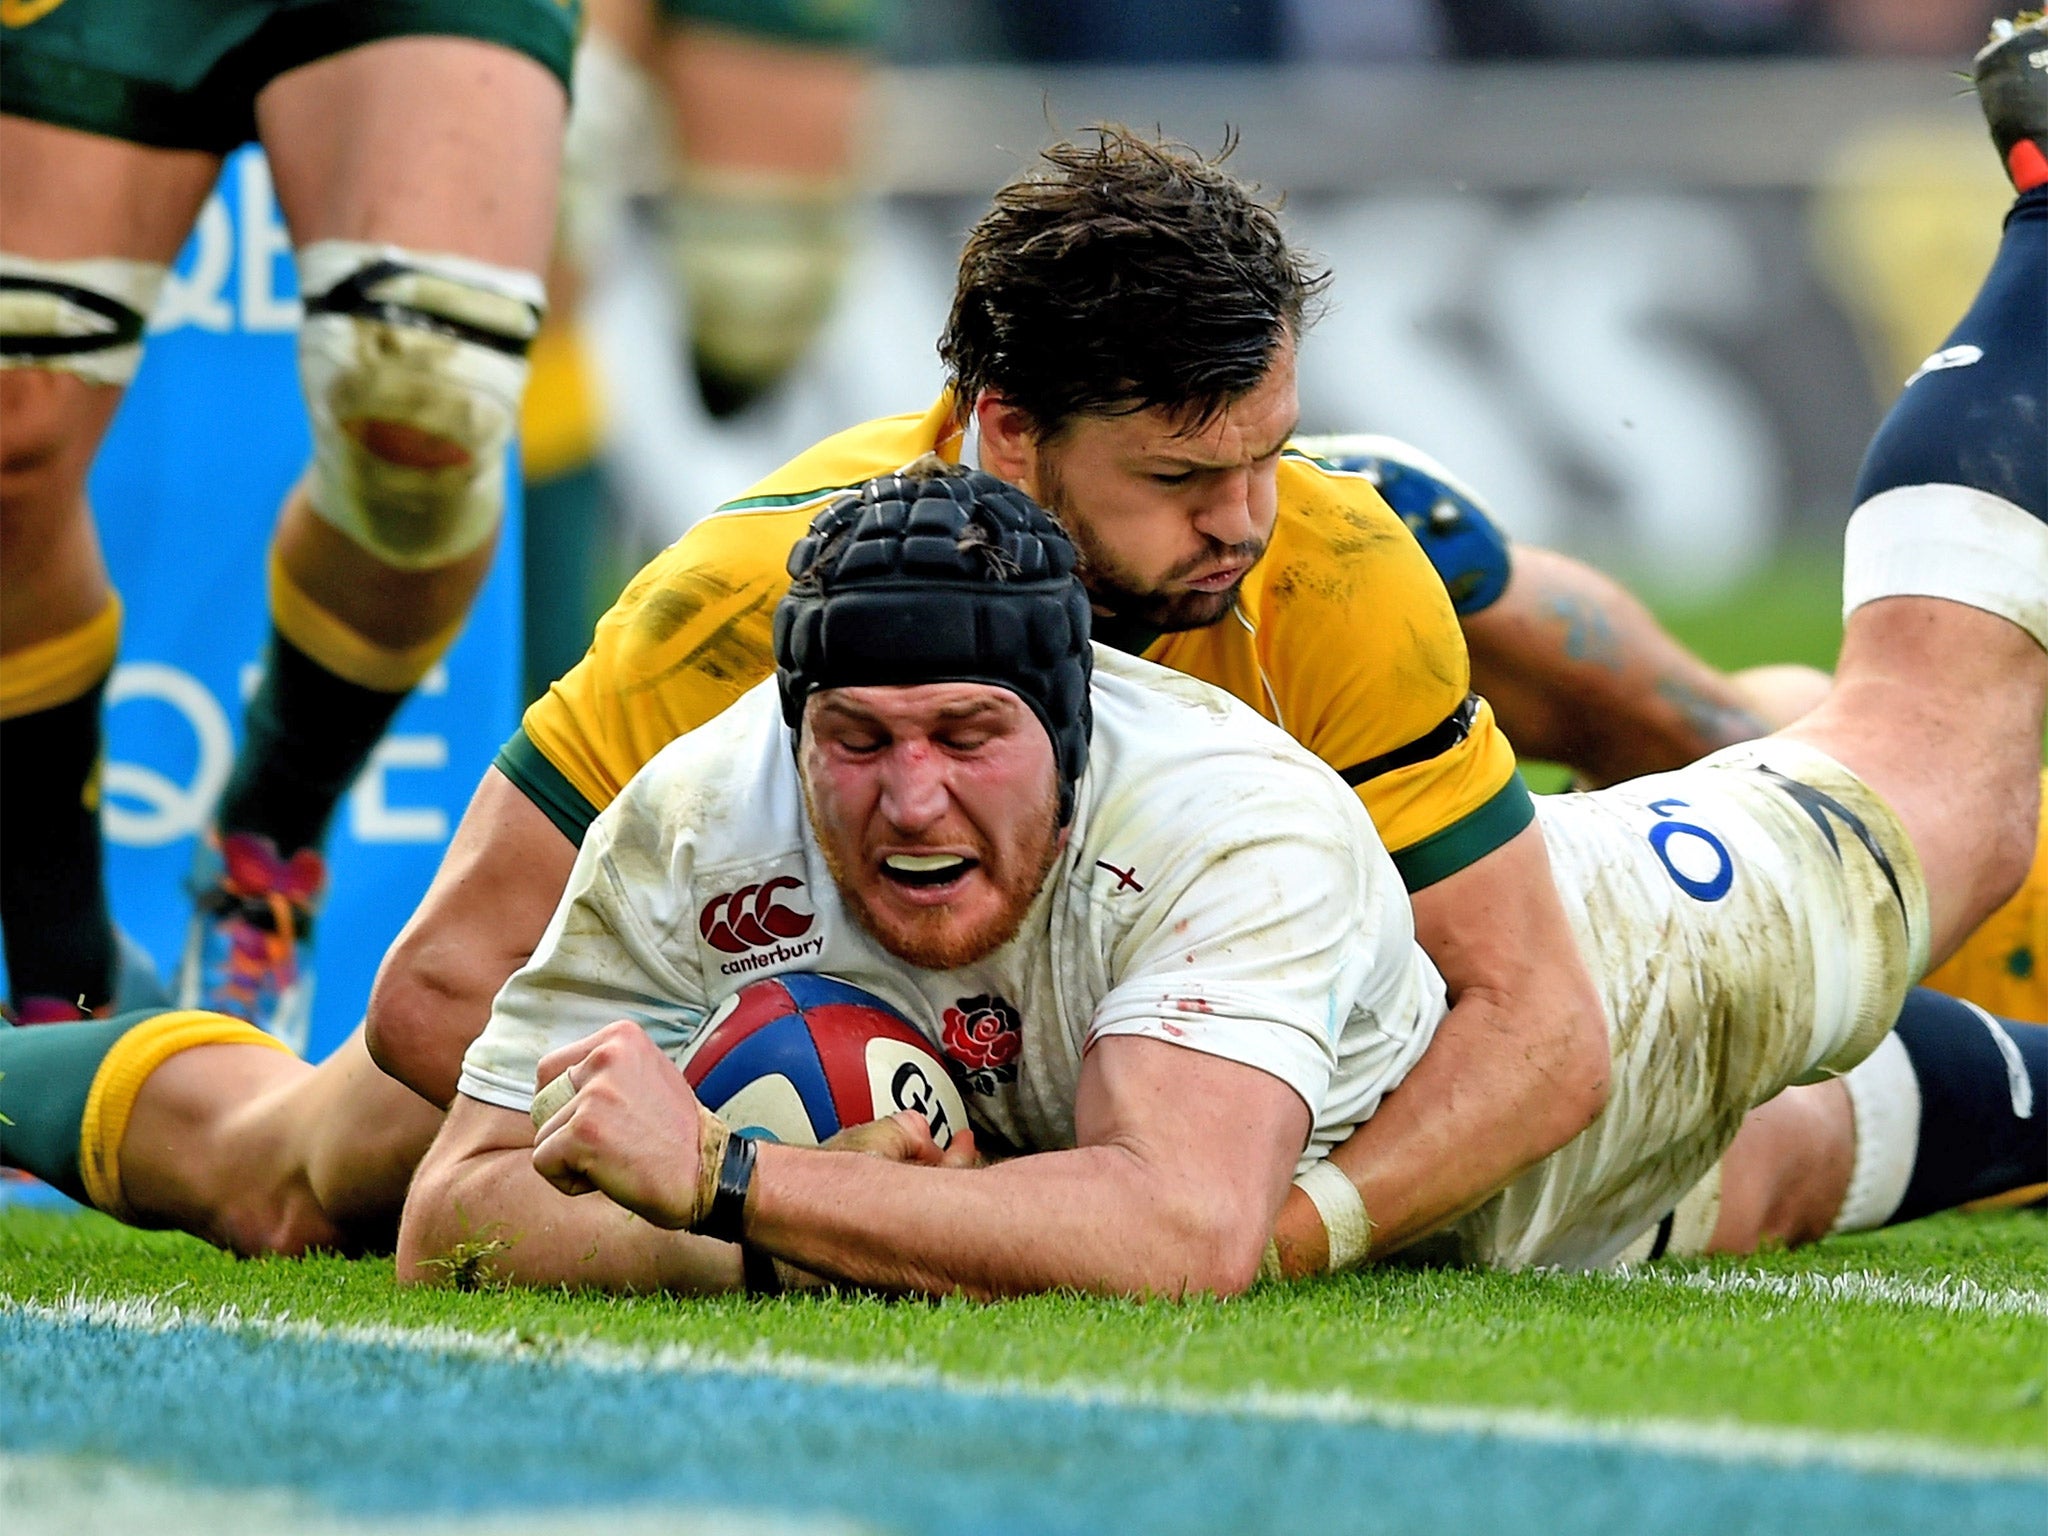 Ben Morgan scores one of his two tries in England’s 26-17 win over Australia at Twickenham in November